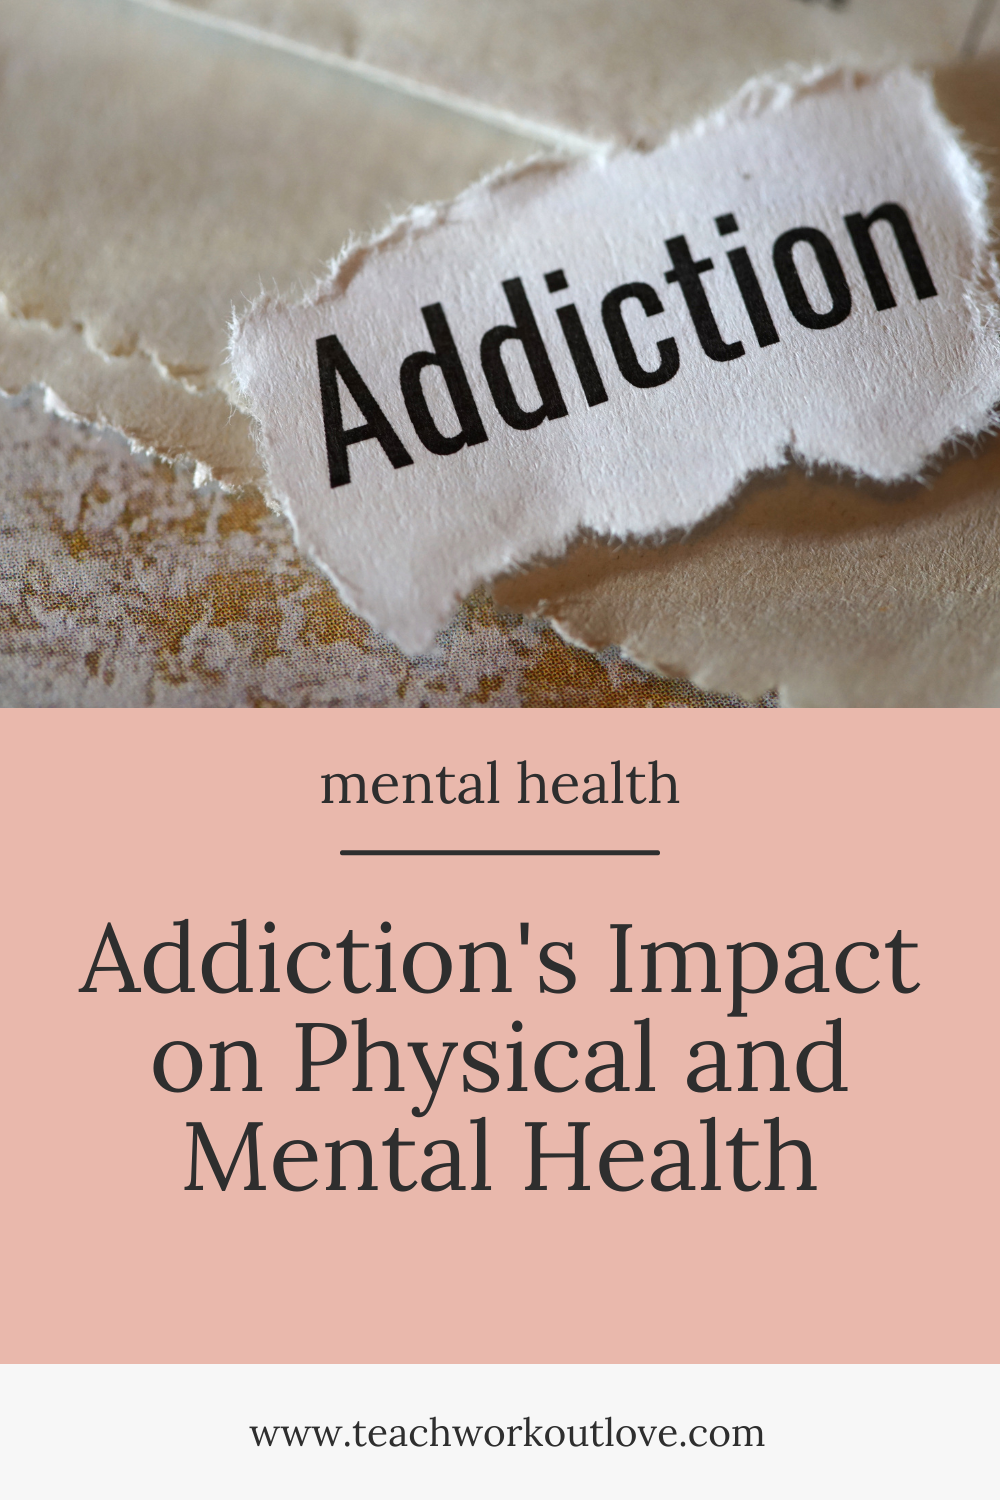 Addiction can lead to mental and physical disorders that reduce your quality of life. Let’s look at the impact of addiction on physical and mental health.